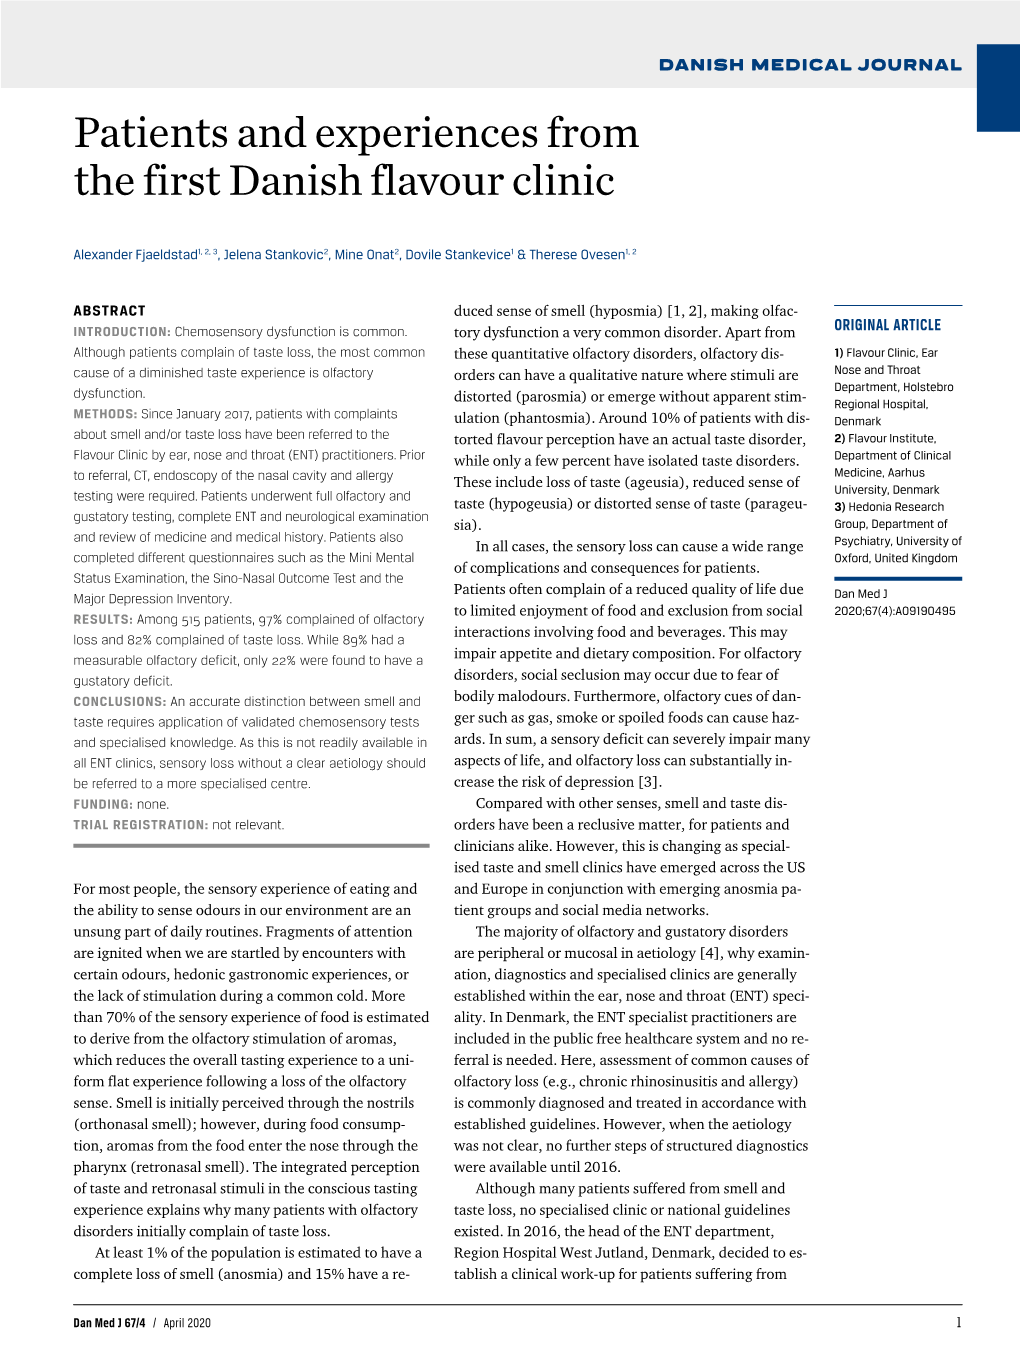 Patients and Experiences from the First Danish Flavour Clinic